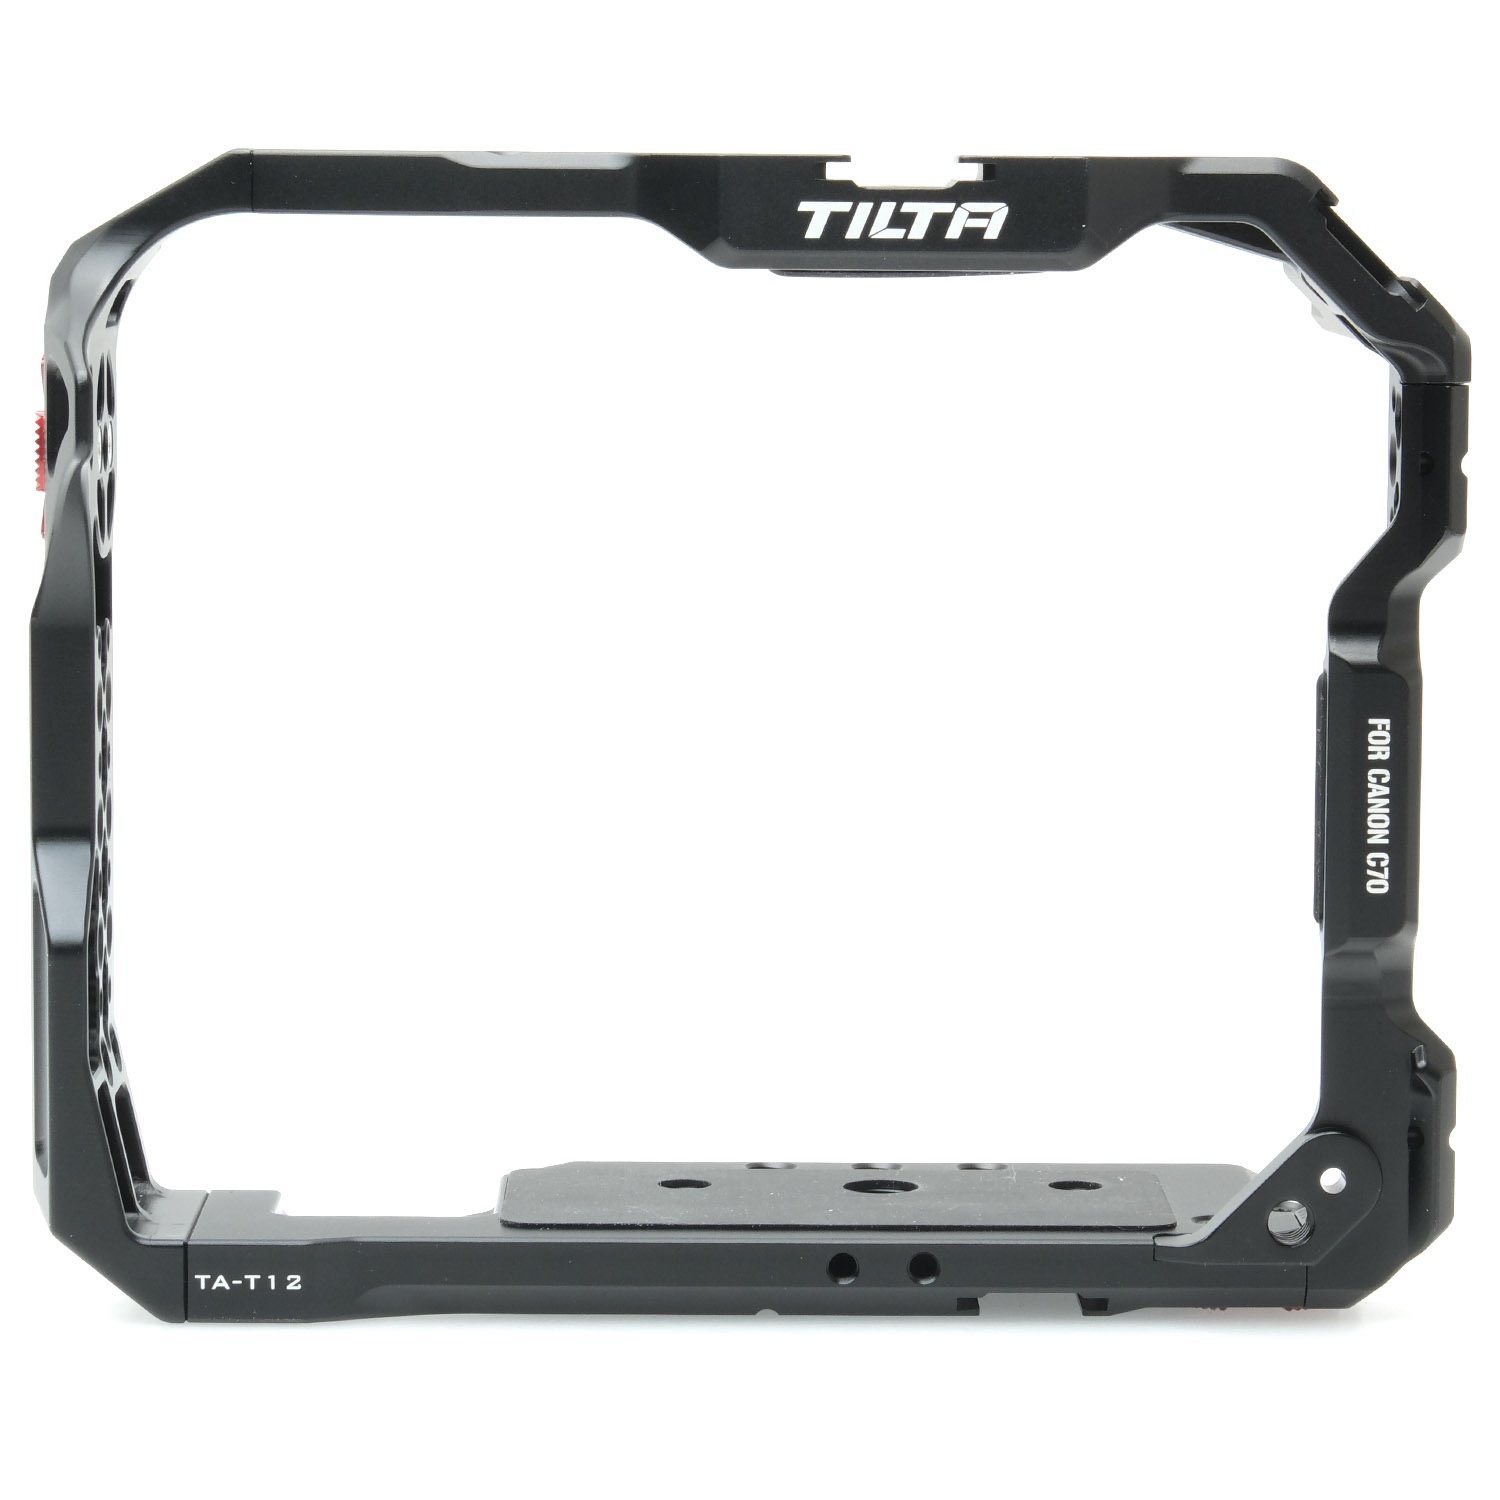 Tilta C70 Cage, Baseplate, Boxed (9+)